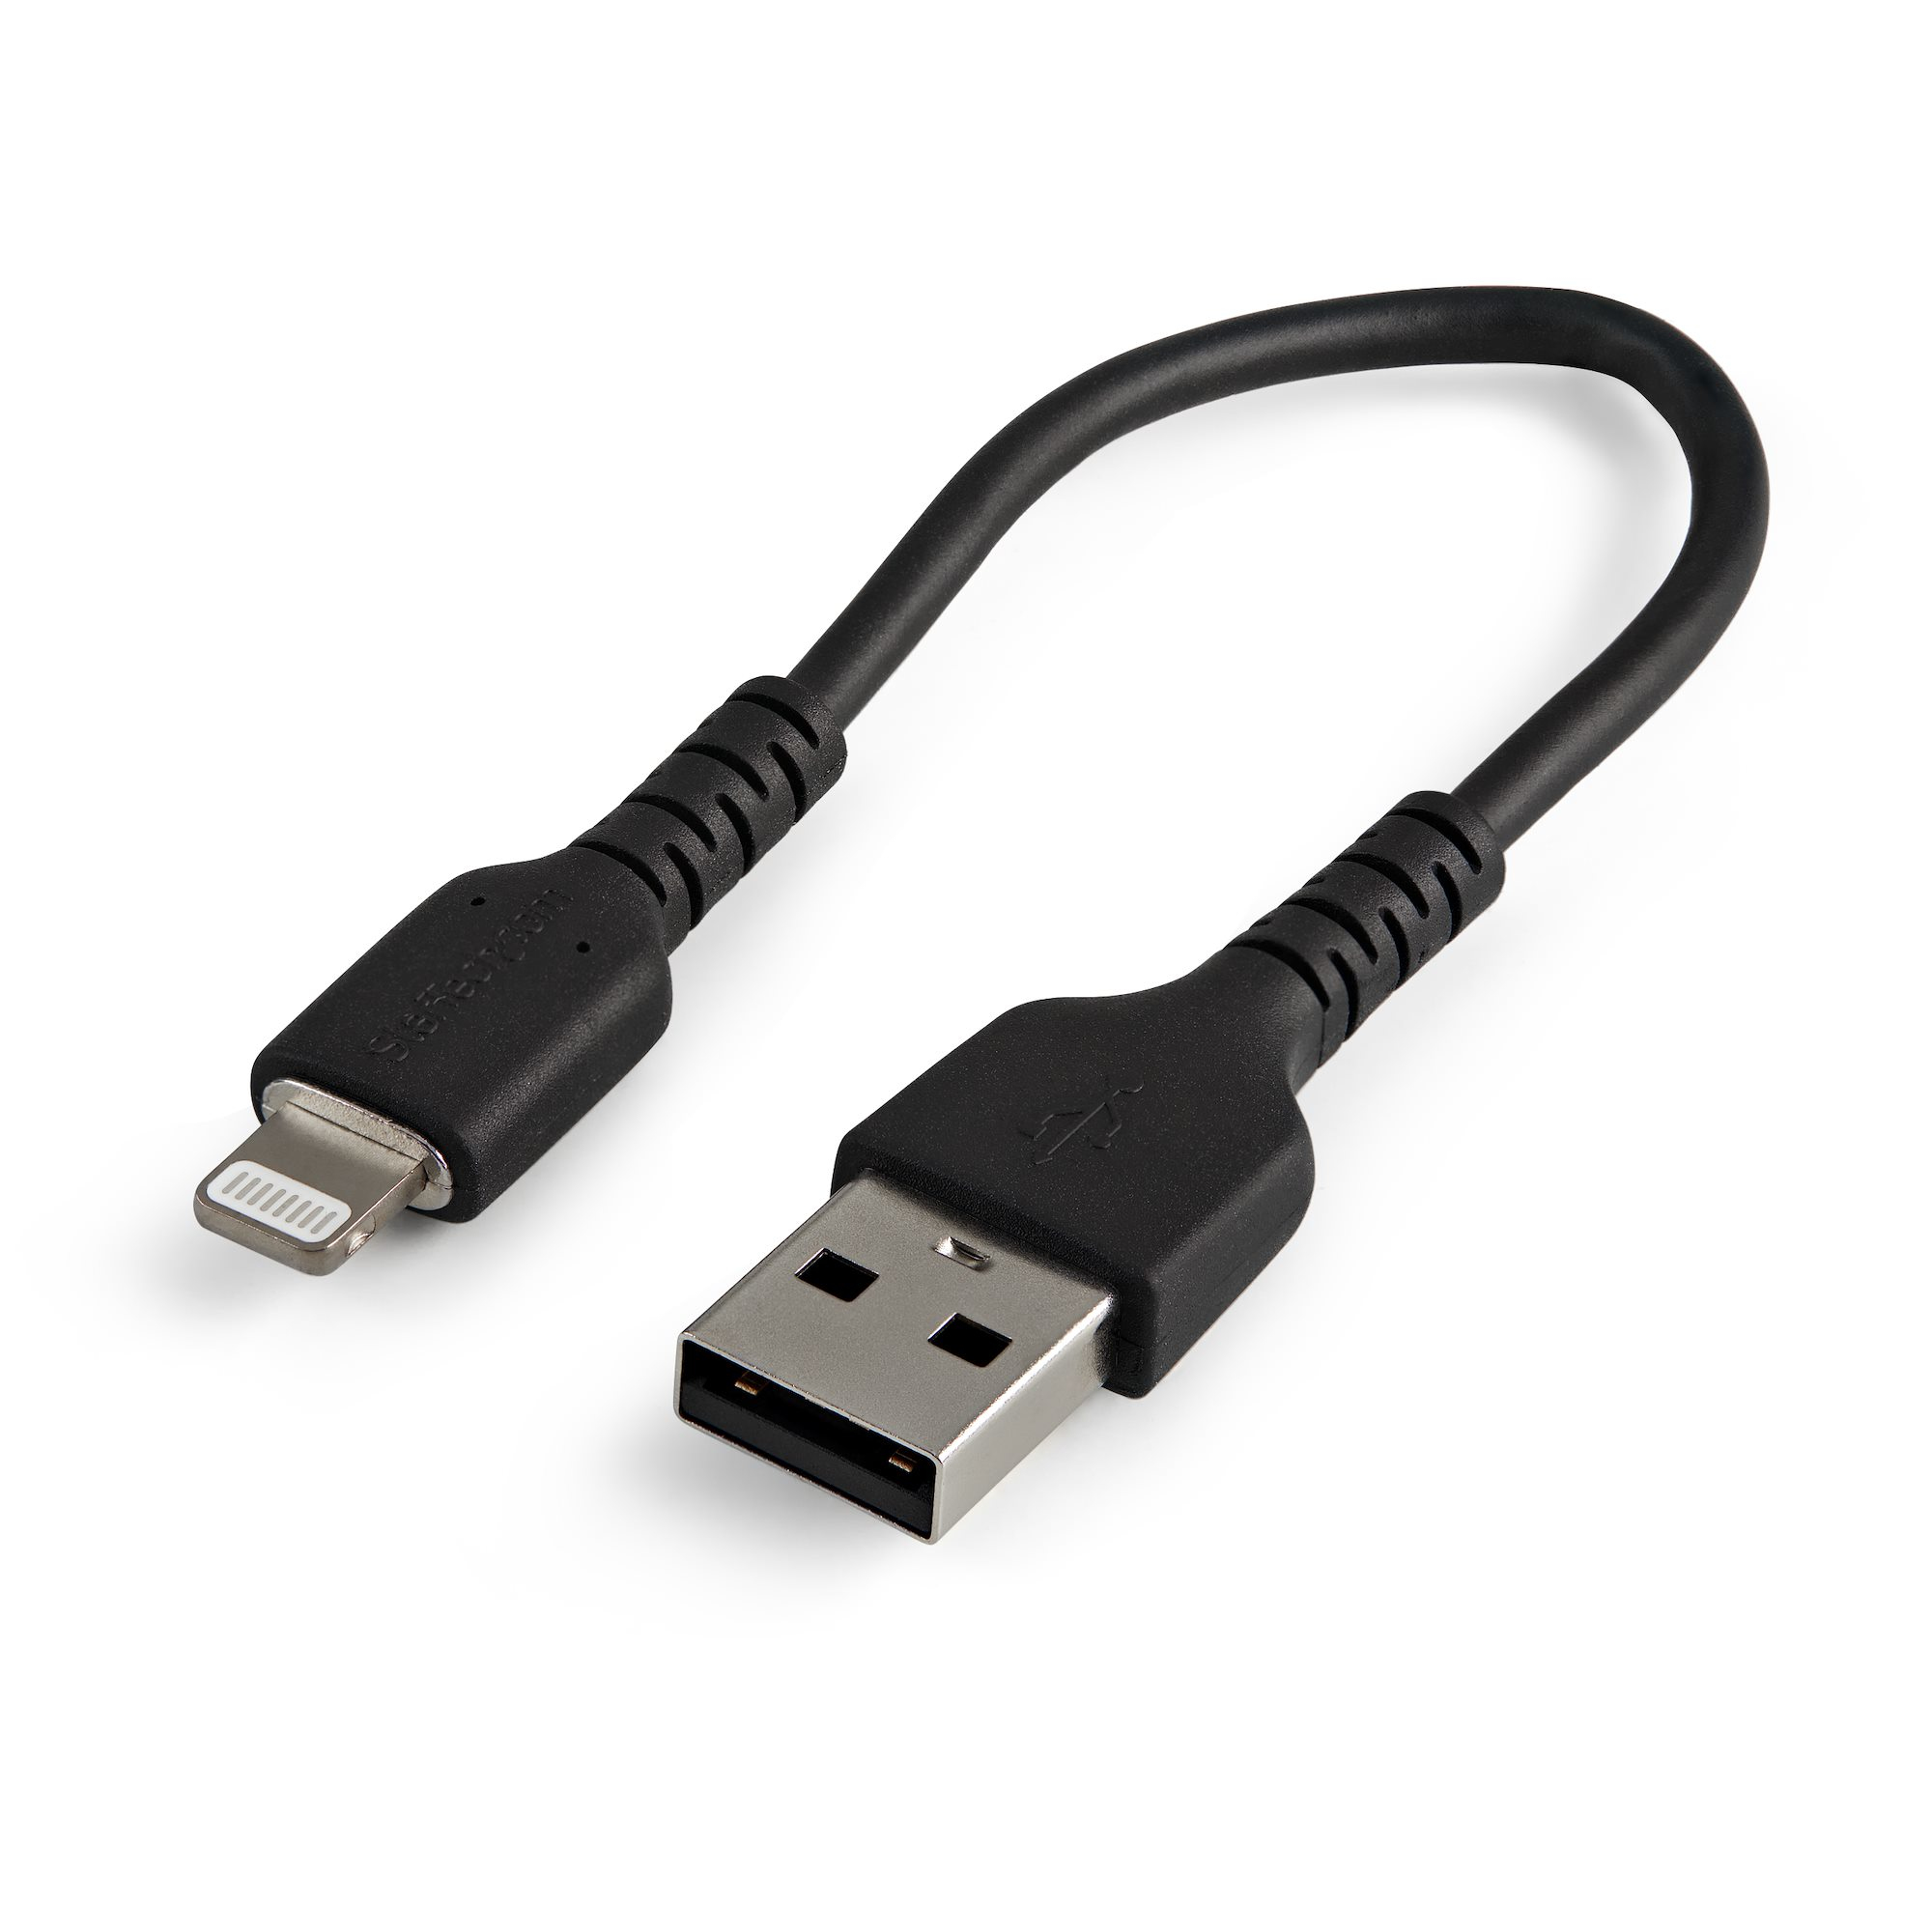 Startech - Computer Parts        15cm Usb To Lightning Cable         Apple Mfi Certified - Black         Rusbltmm15cmb